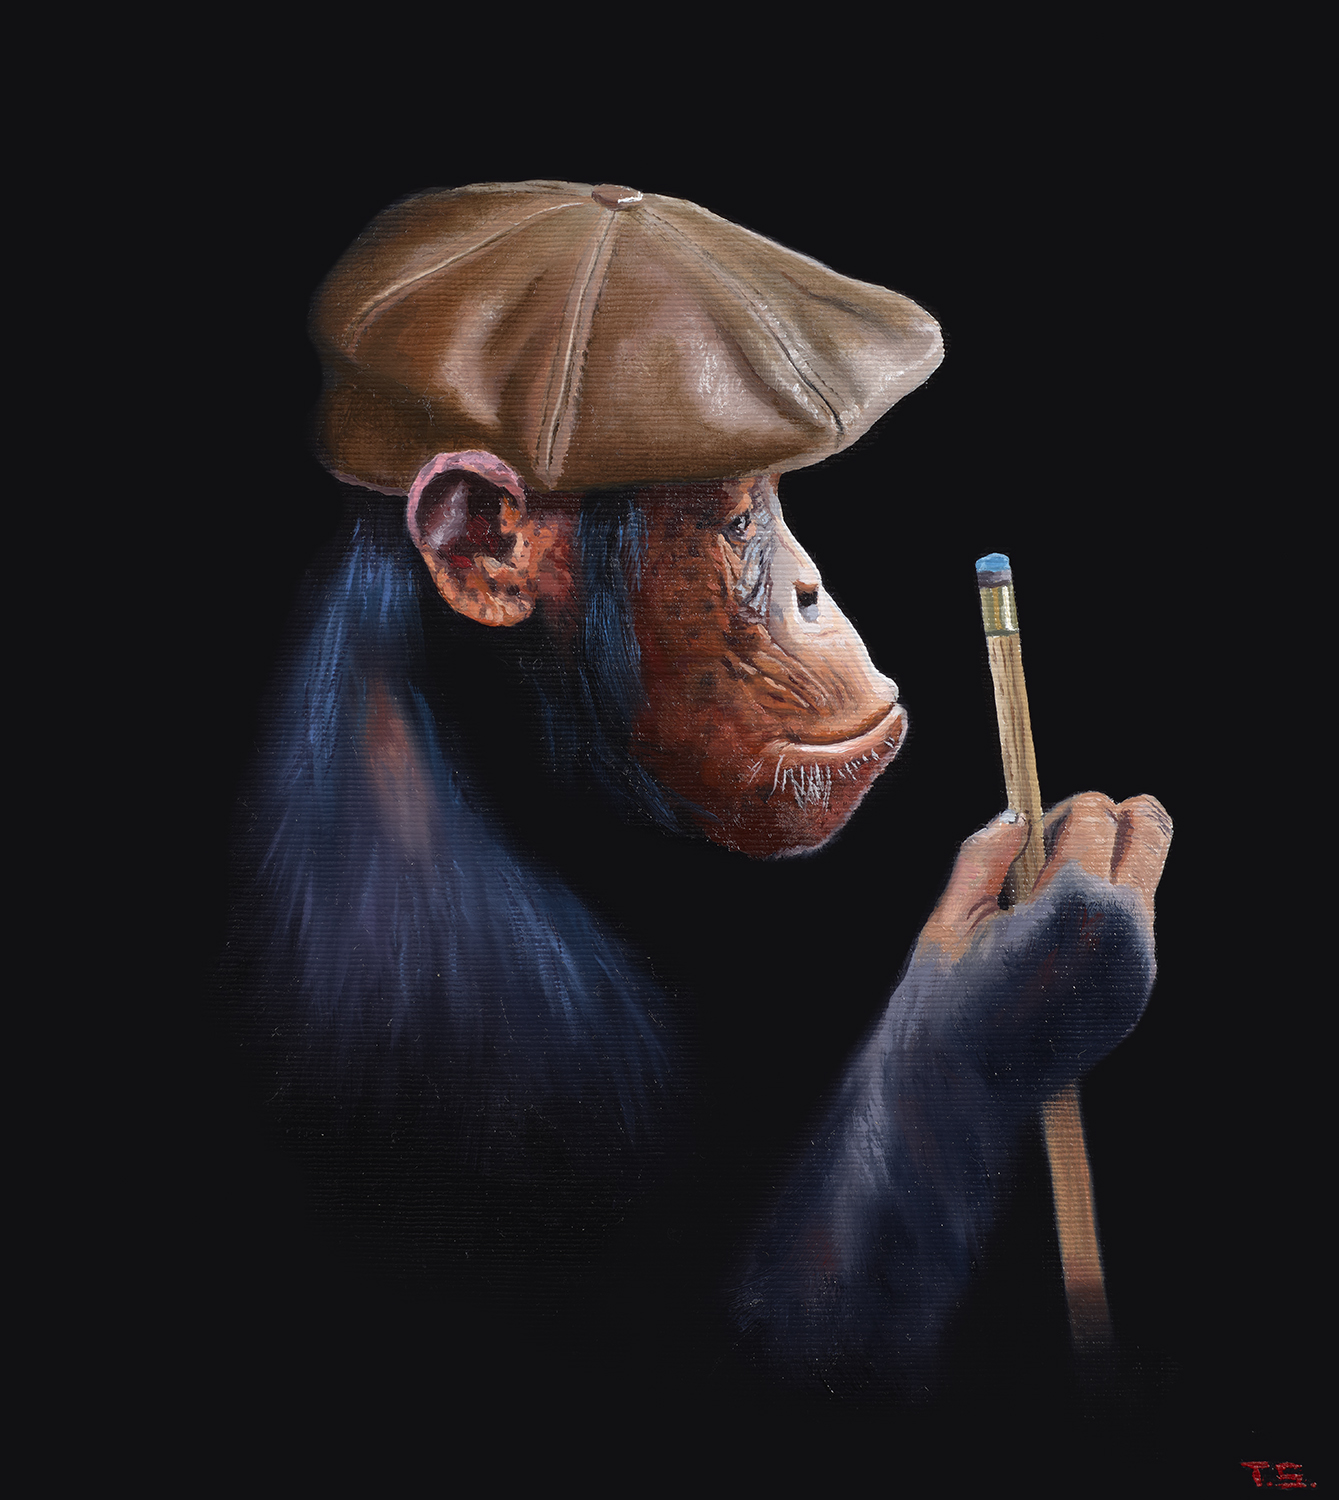 A monkey wearing a cap with a pool cue - Tony South - Hustle